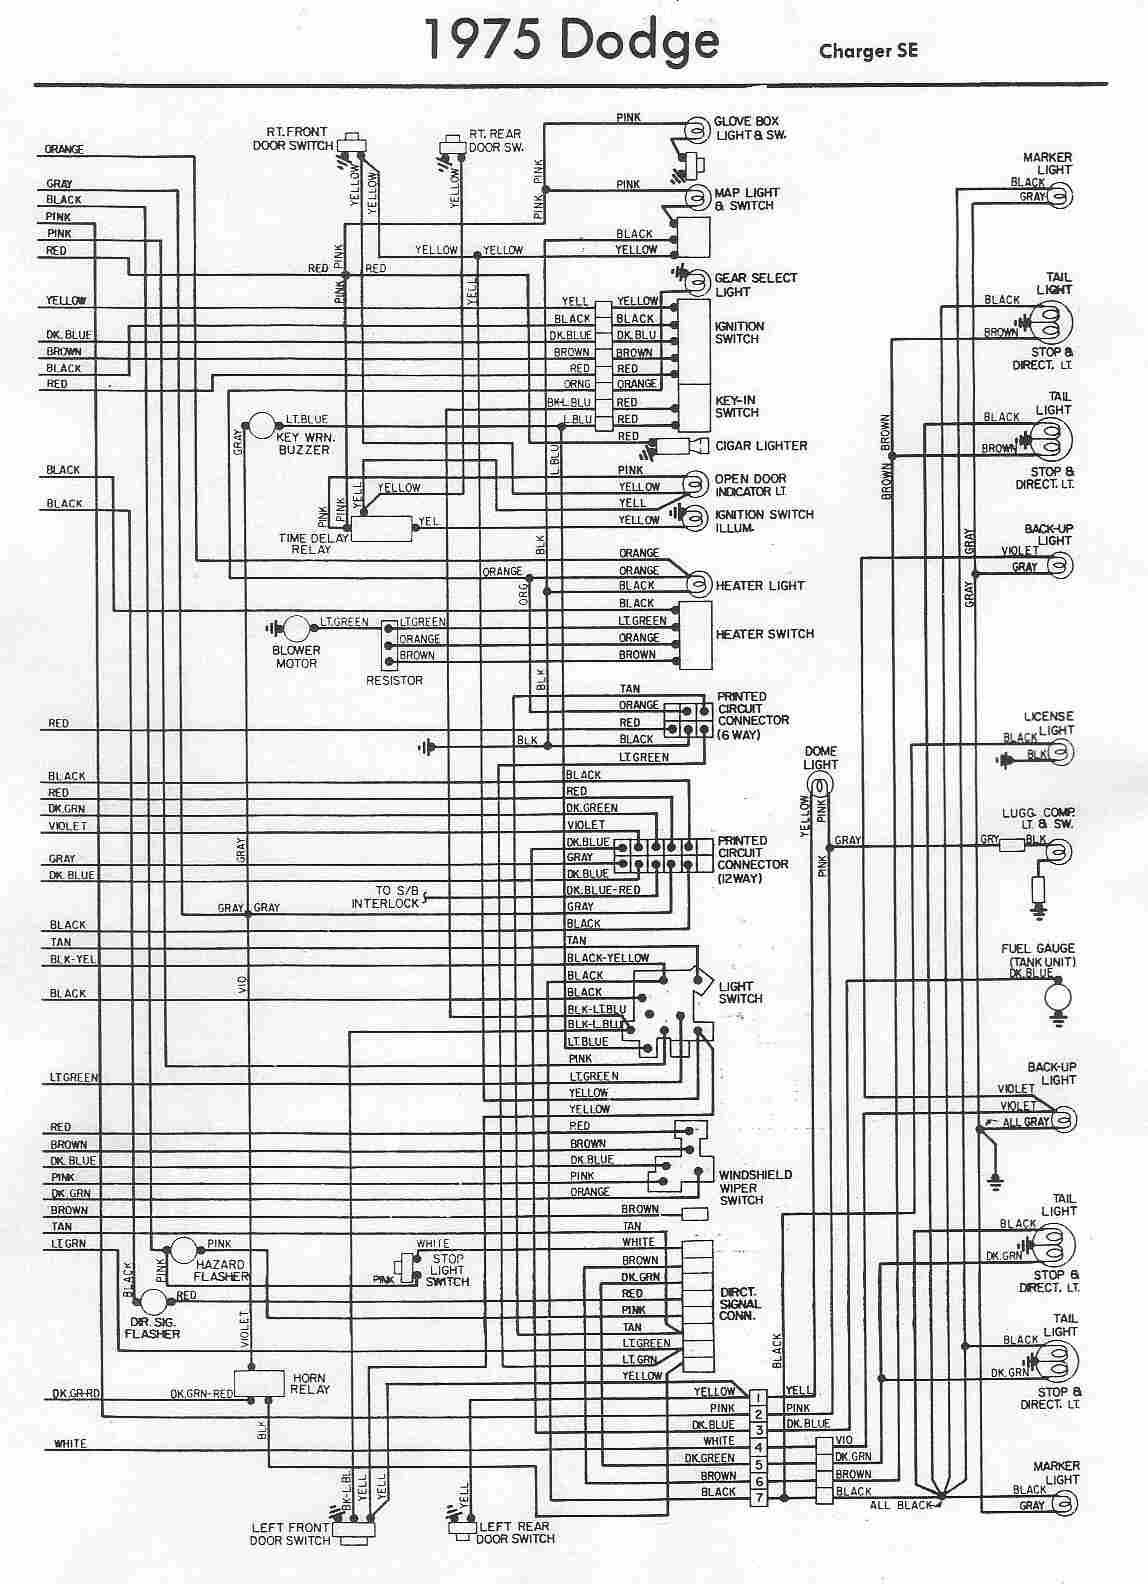 Dodge - car manuals, wiring diagrams PDF & fault codes diagrams for 1973 dodge charger 